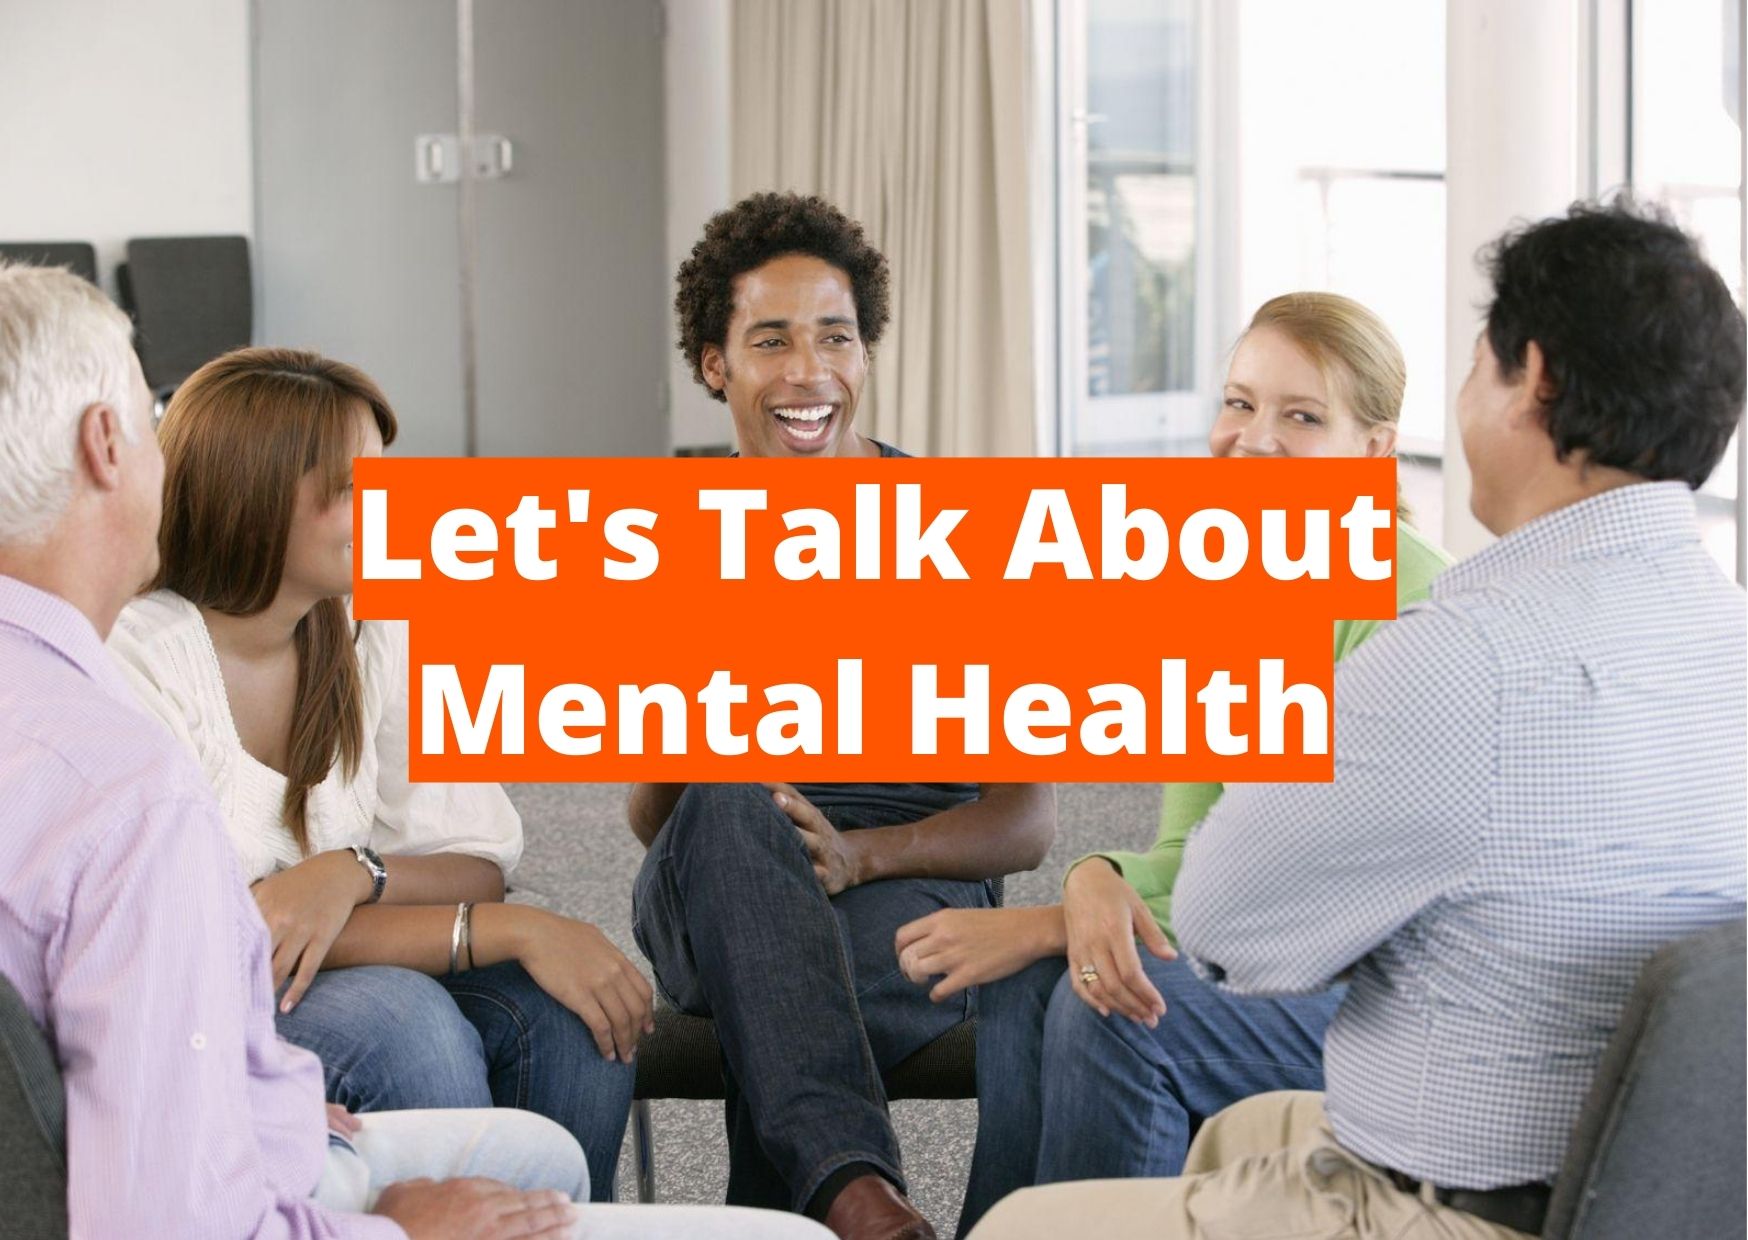 Let's talk about mental health